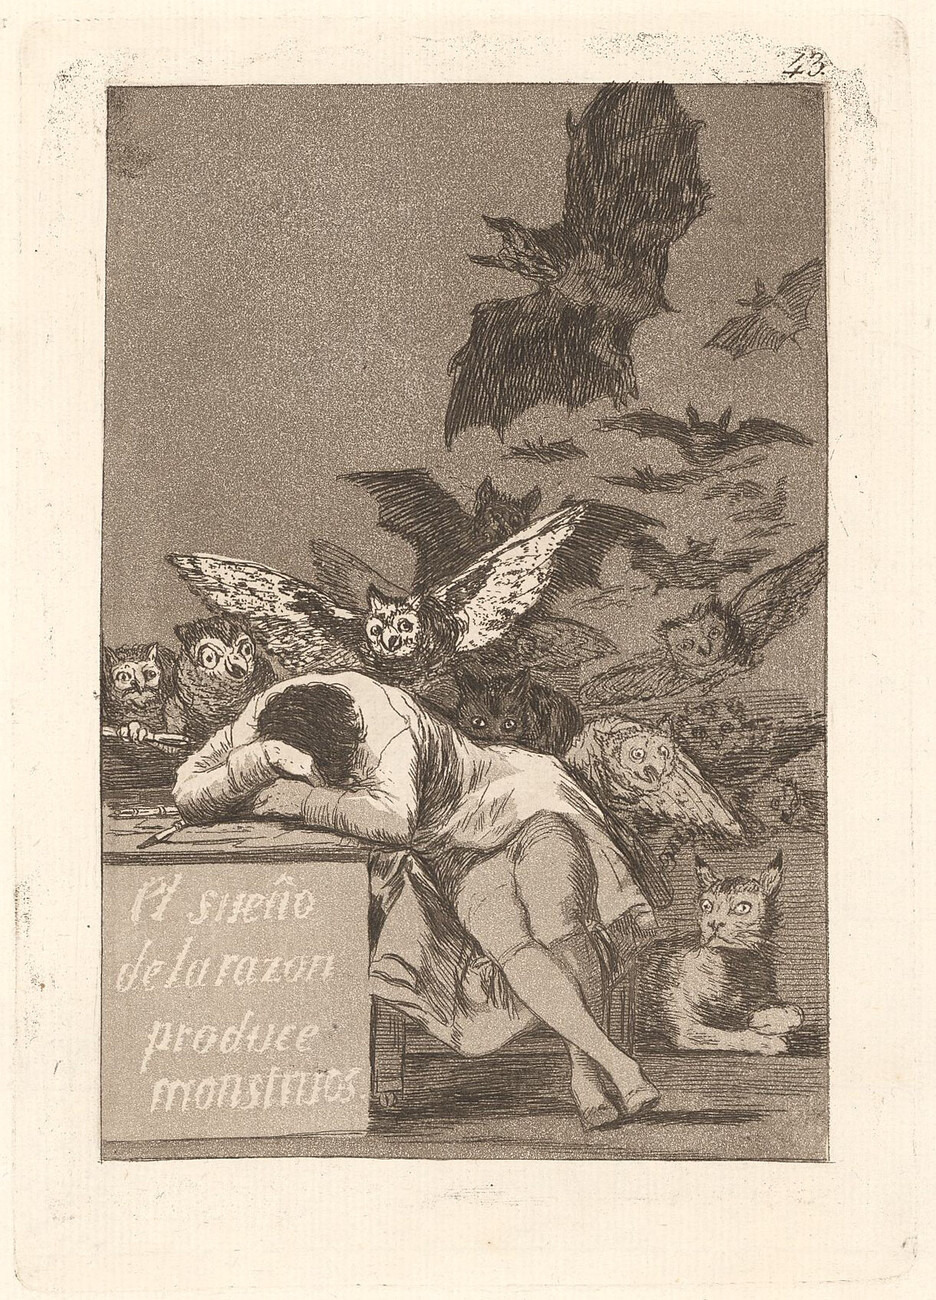 person sleeping with owls, bats, and other animals around them